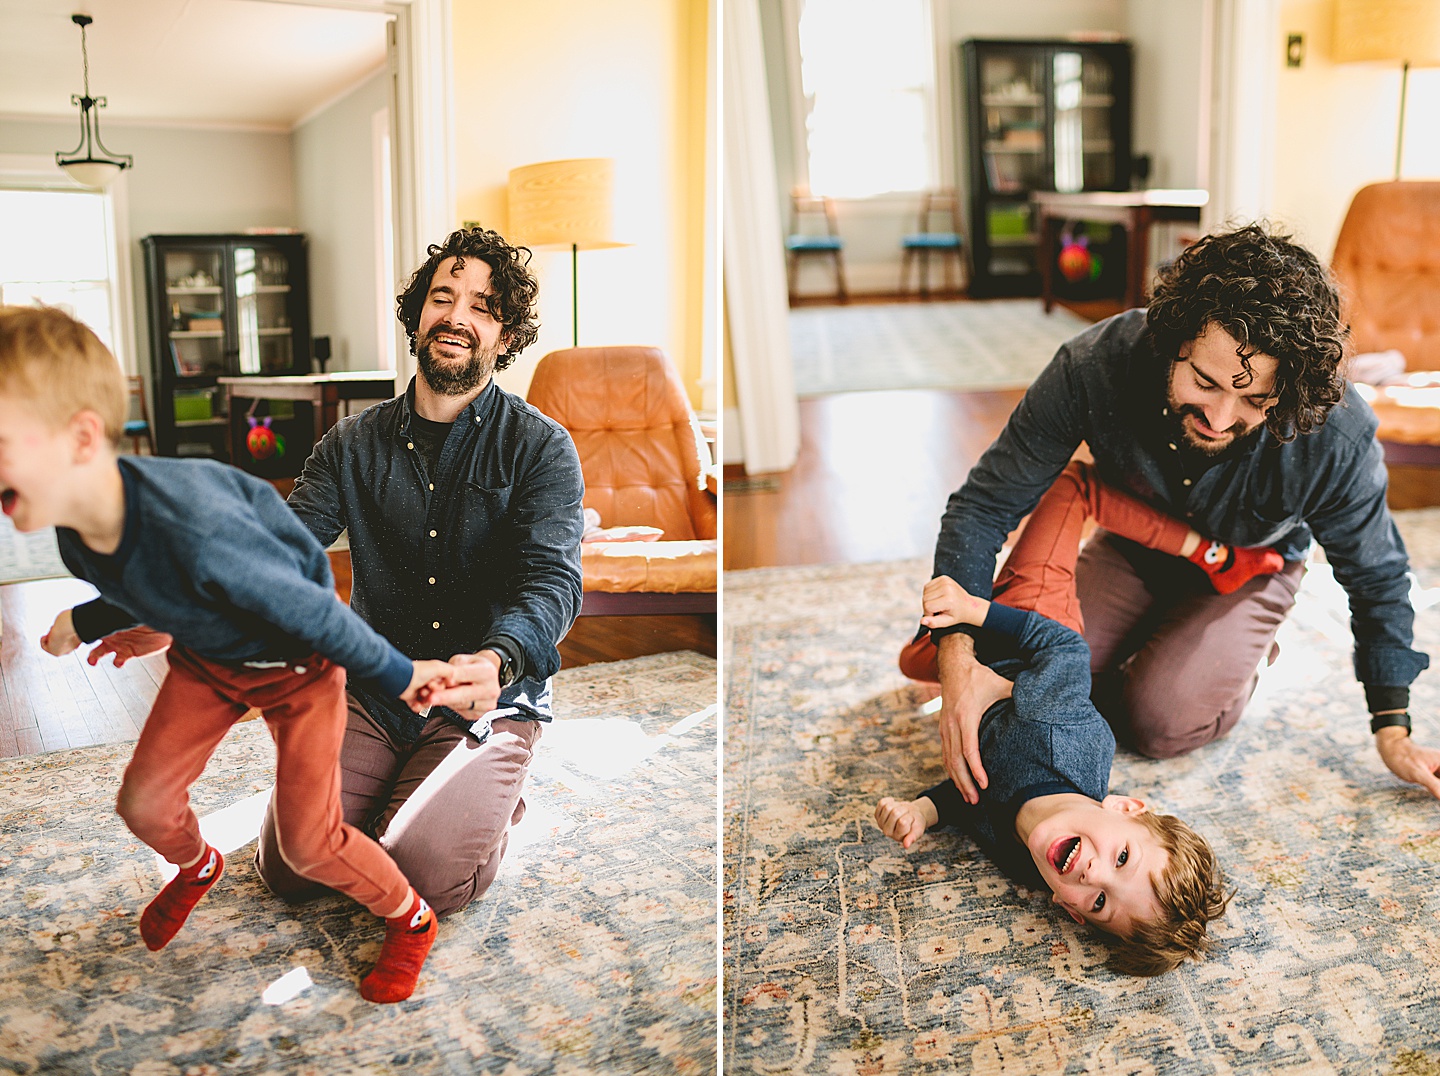 Father and son wrestling on ground in living room laughing